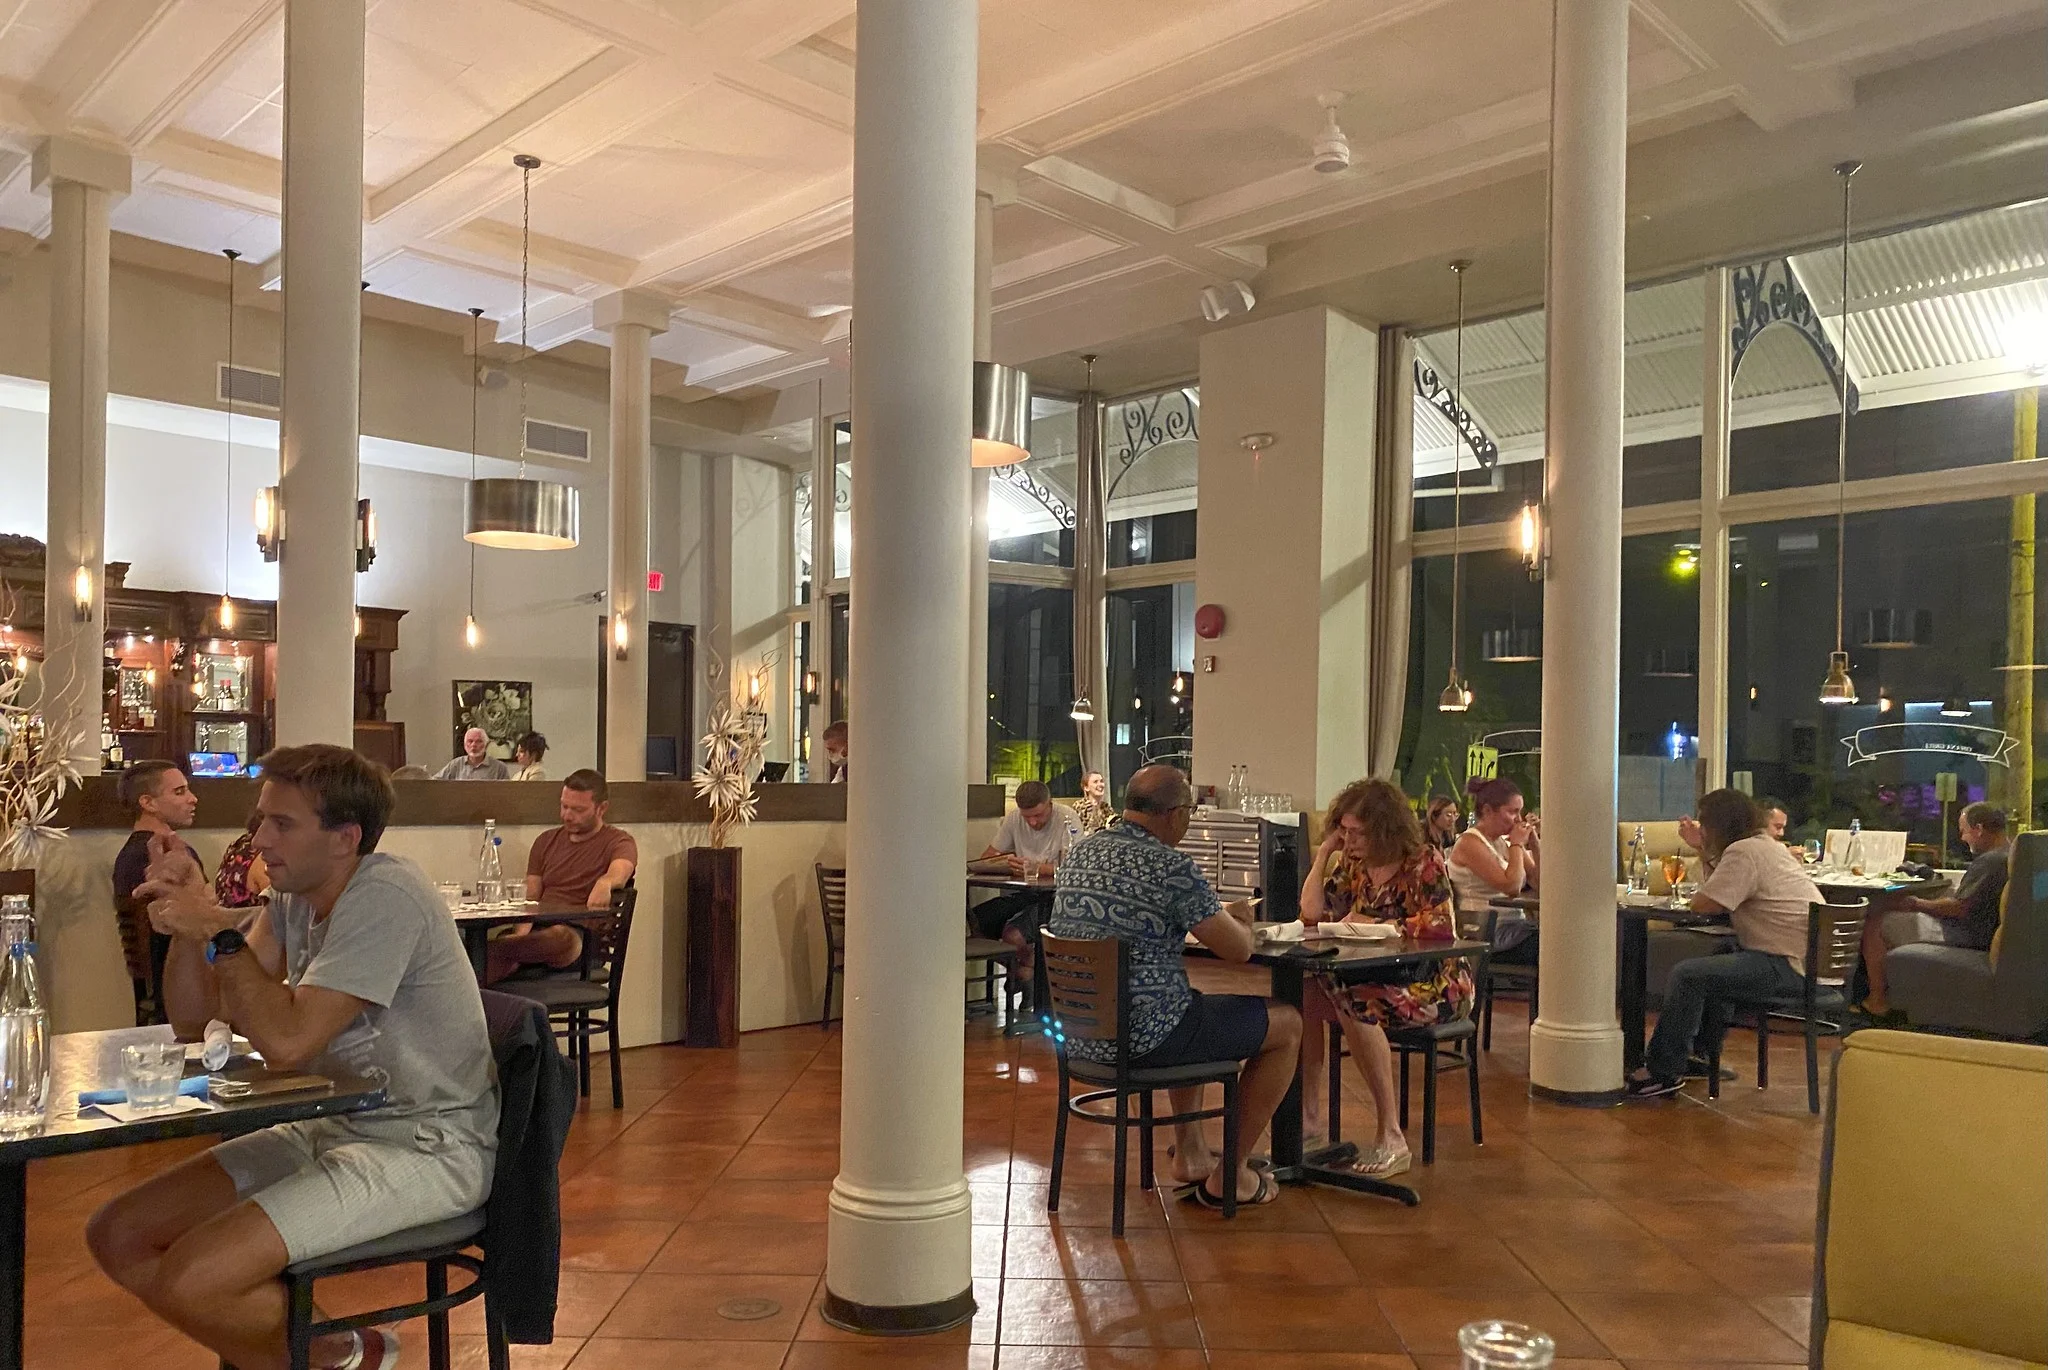 Couples and friends dined in a romantic evening at Jackie Rey’s Ohana Grill, one of the best restaurants in Kona, Hawaii, with white interior and brown tiled floor